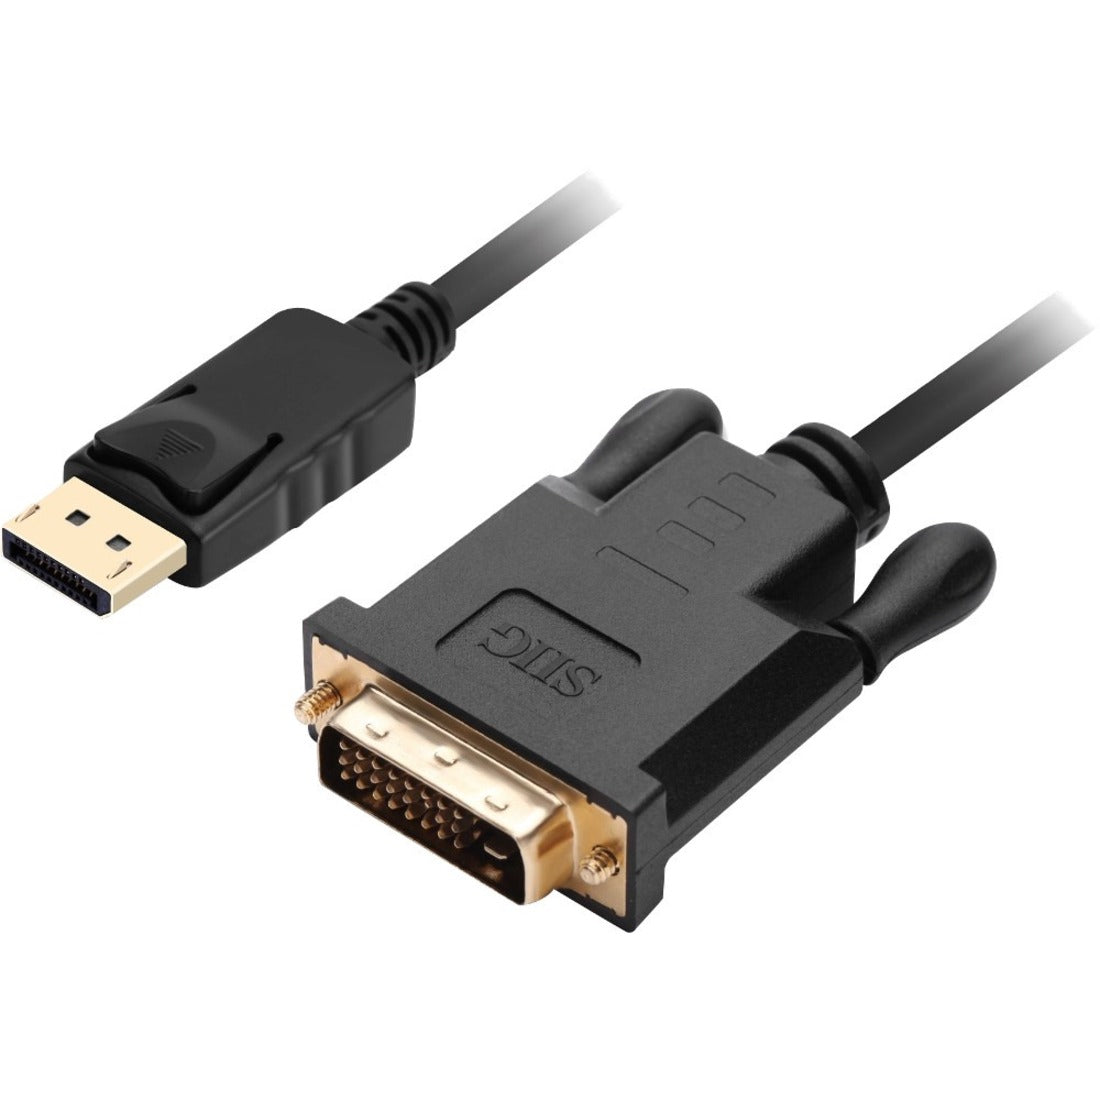 SIIG CB-DP1V12-S1 DisplayPort to DVI 6ft Cable, Plug & Play, Triple Shielded, Gold-Plated Connectors